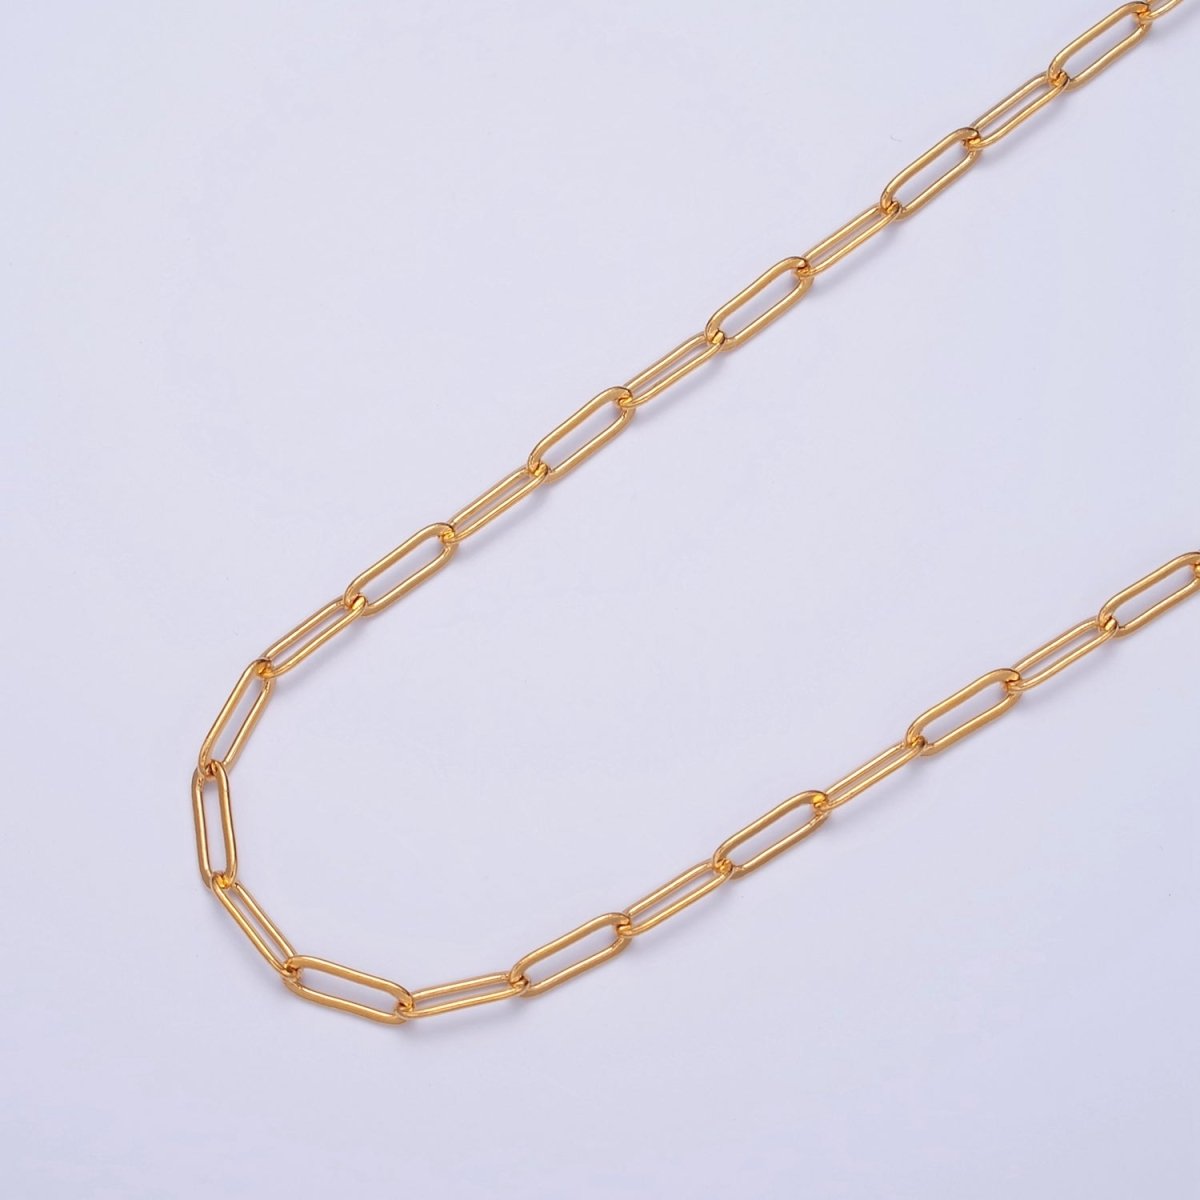 Cable Link Unfinished Chain, 9mm x 3.2mm, 24k Gold Filled Chain 19.5 inch long | WA-1386 Clearance Pricing - DLUXCA